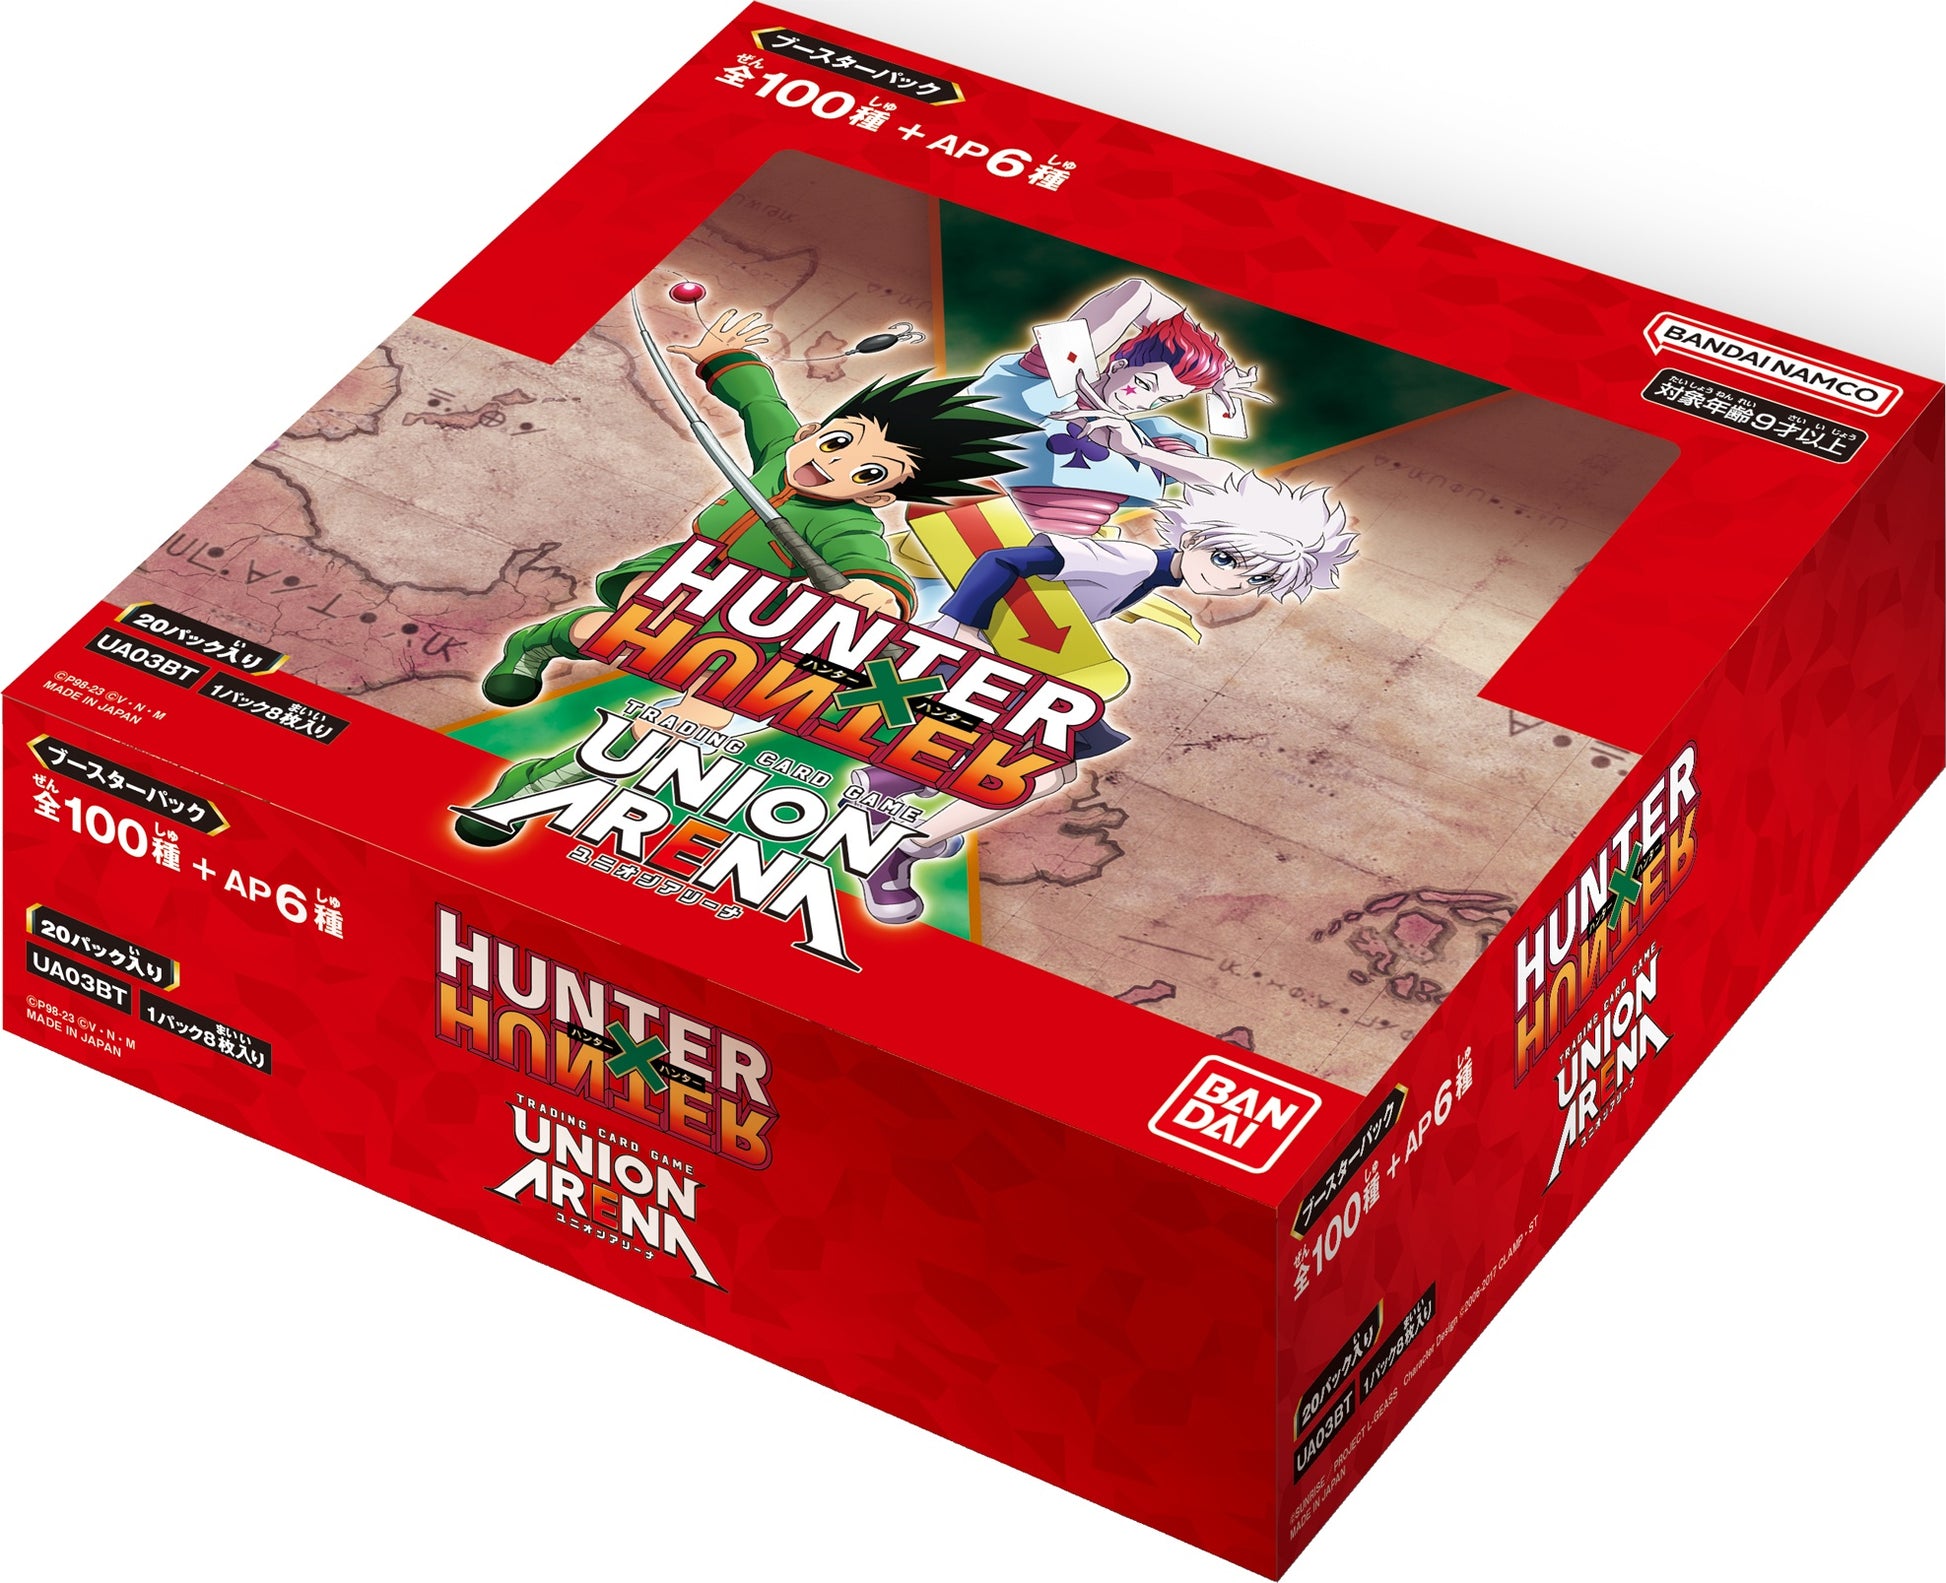 UNION ARENA Hunter x Hunter Booster Box / Case - n4ytcg